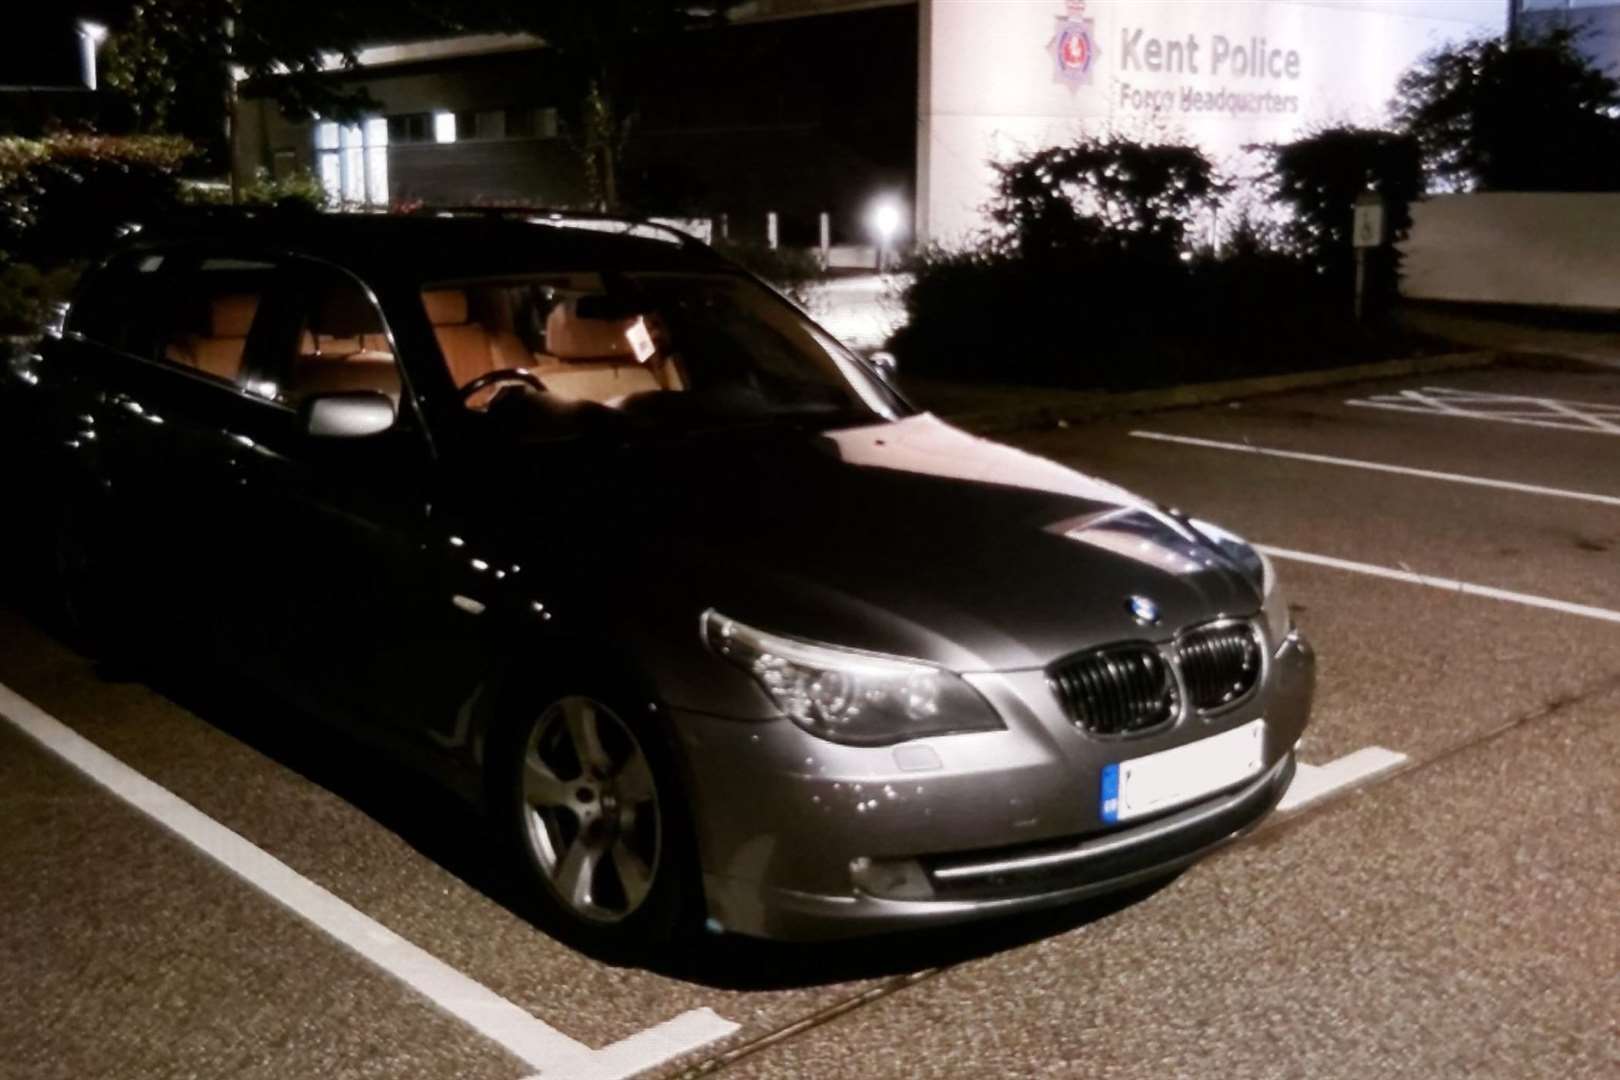 A BMW was reportedly clocked at around 100mph on the A2. Photo: @KentPoliceRPU